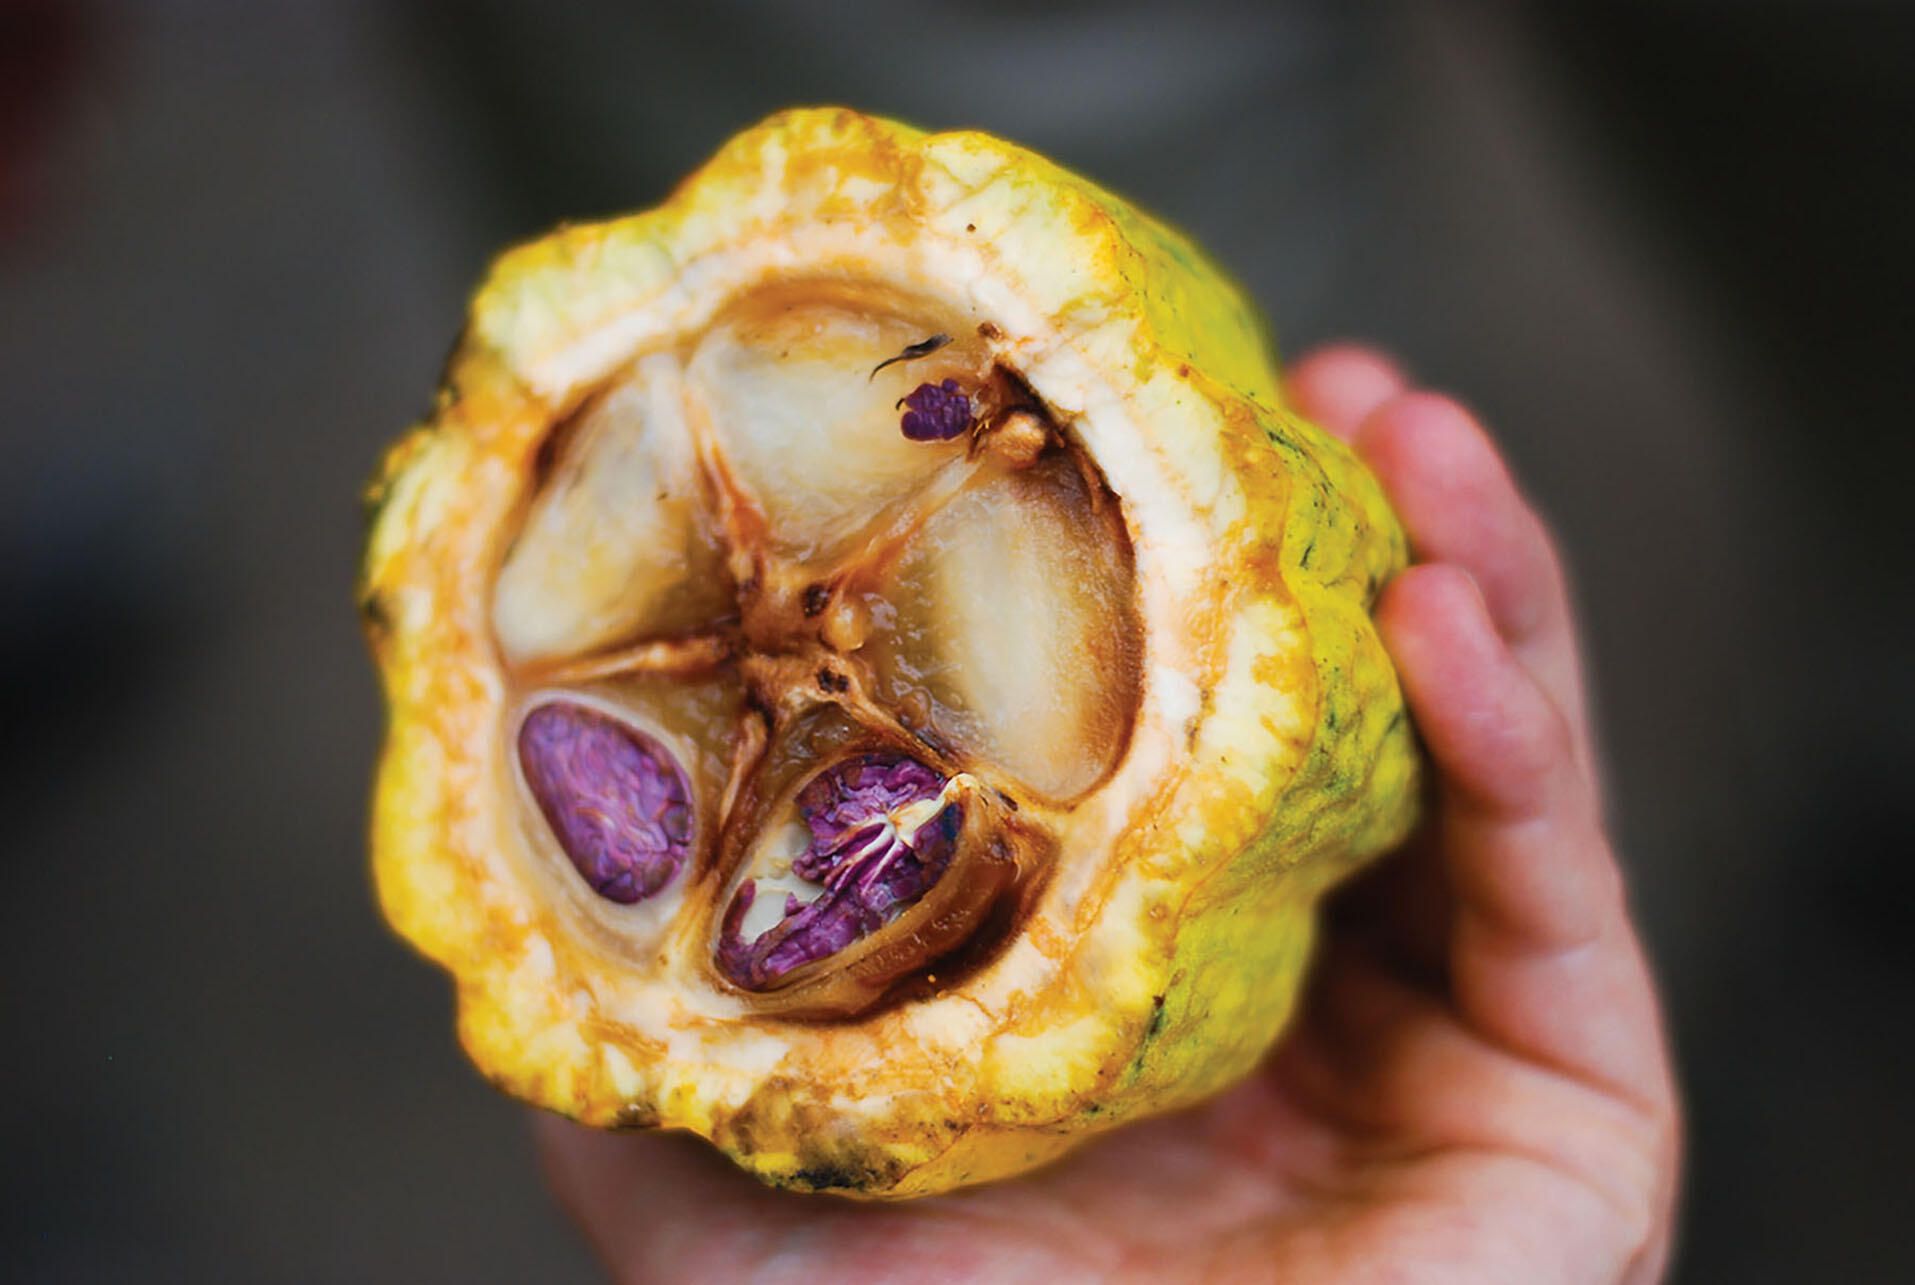 The inside detail of a cacao pod. (Photo by Everjean.)